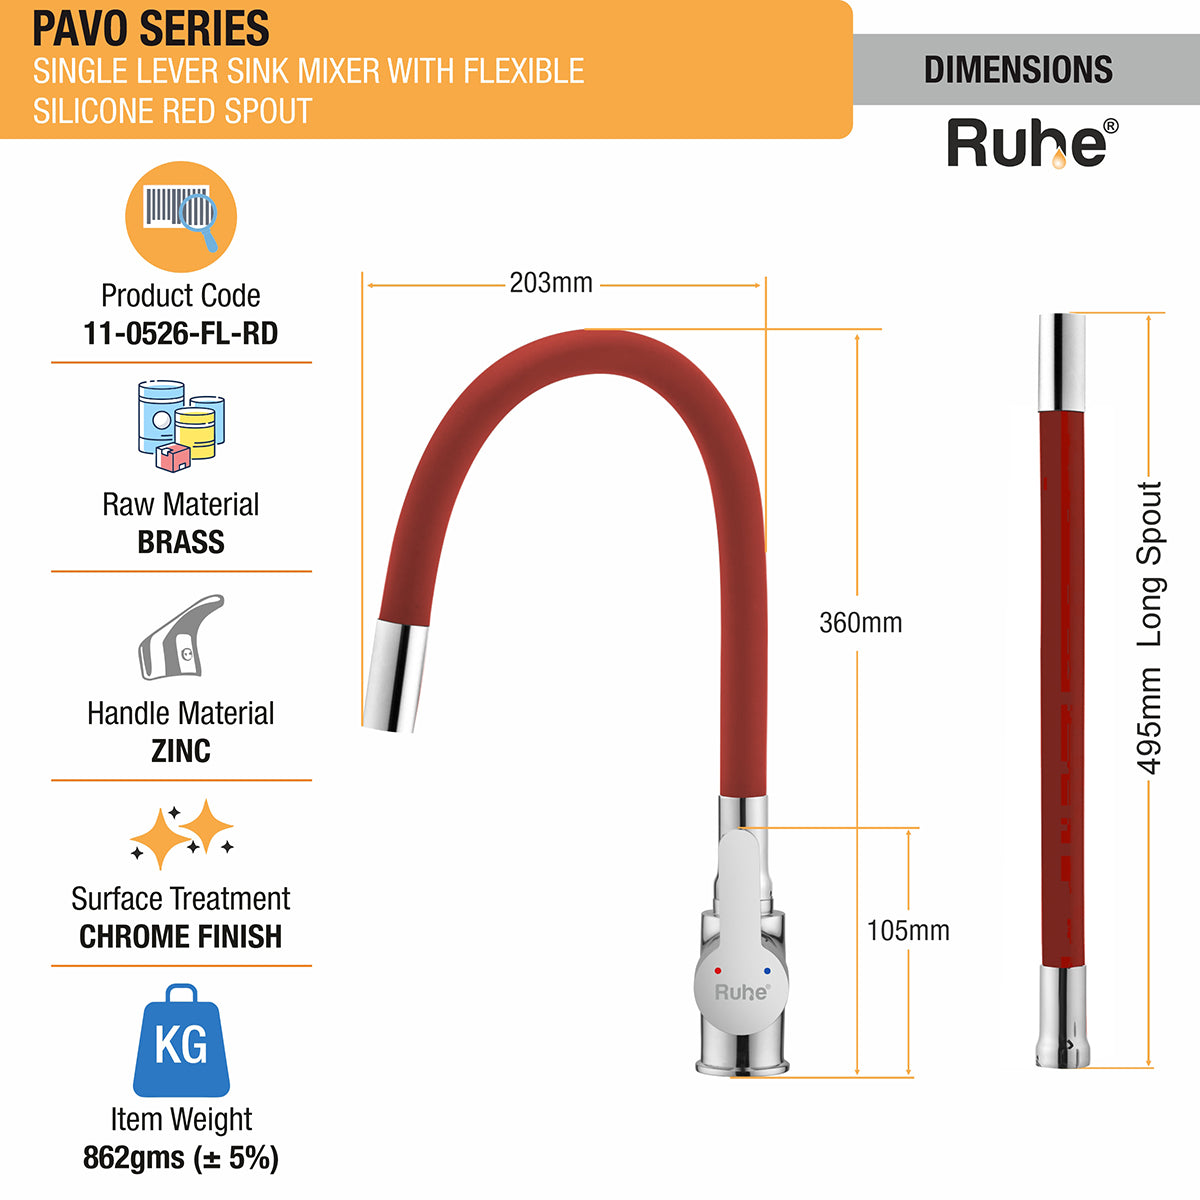 Pavo Single Lever Sink Mixer Faucet with Silicone Red Flexible Spout dimensions and sizes